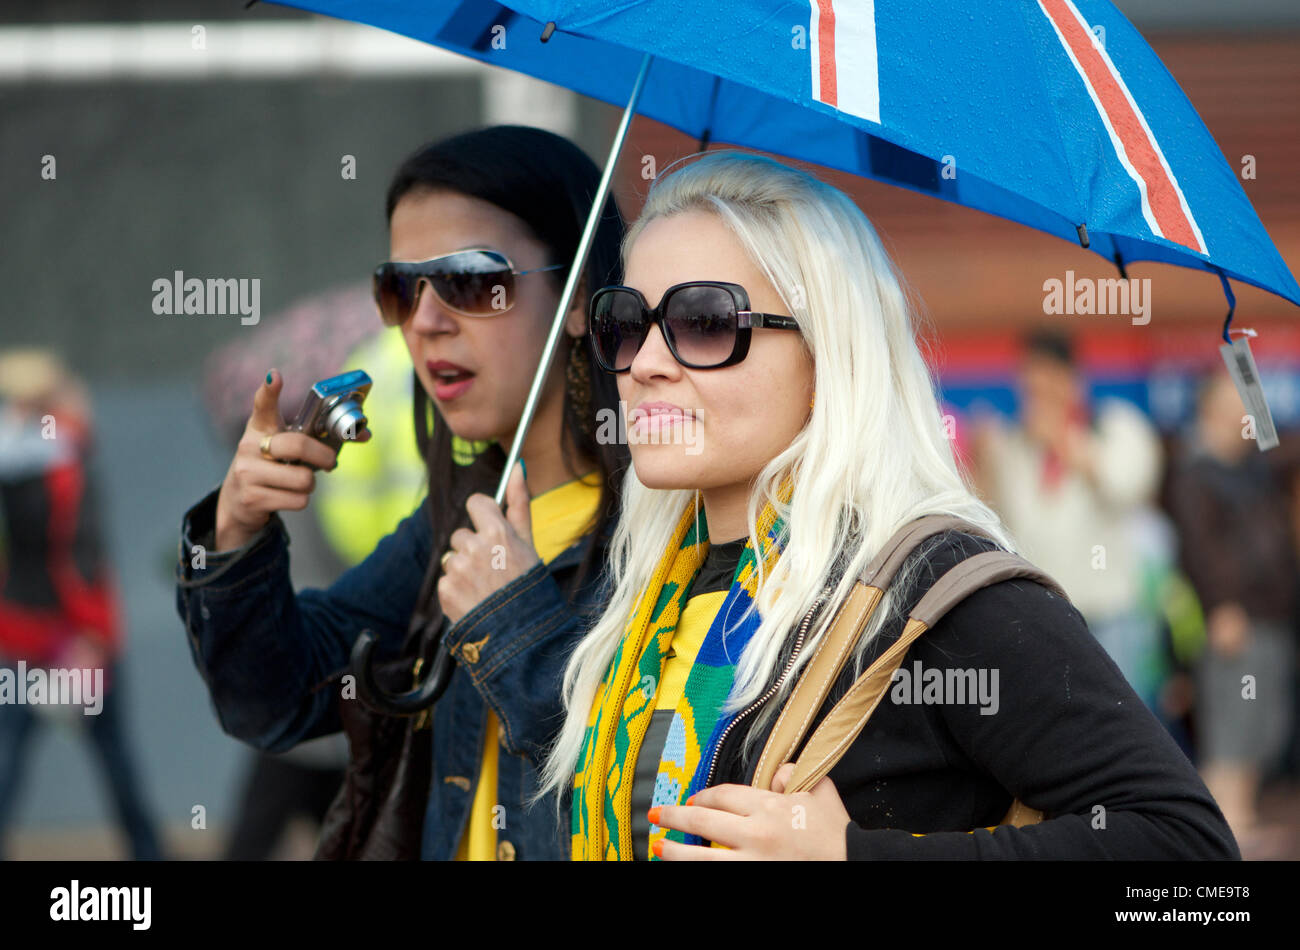 Two Brazilian fans outside Old Trafford, Manchester United's ground, where Olympic Football matches  will be played later in the afternoon.Brazil v Belarus will be followed by Egypt v New Zealand. Manchester, UK 29-07-2012 Stock Photo